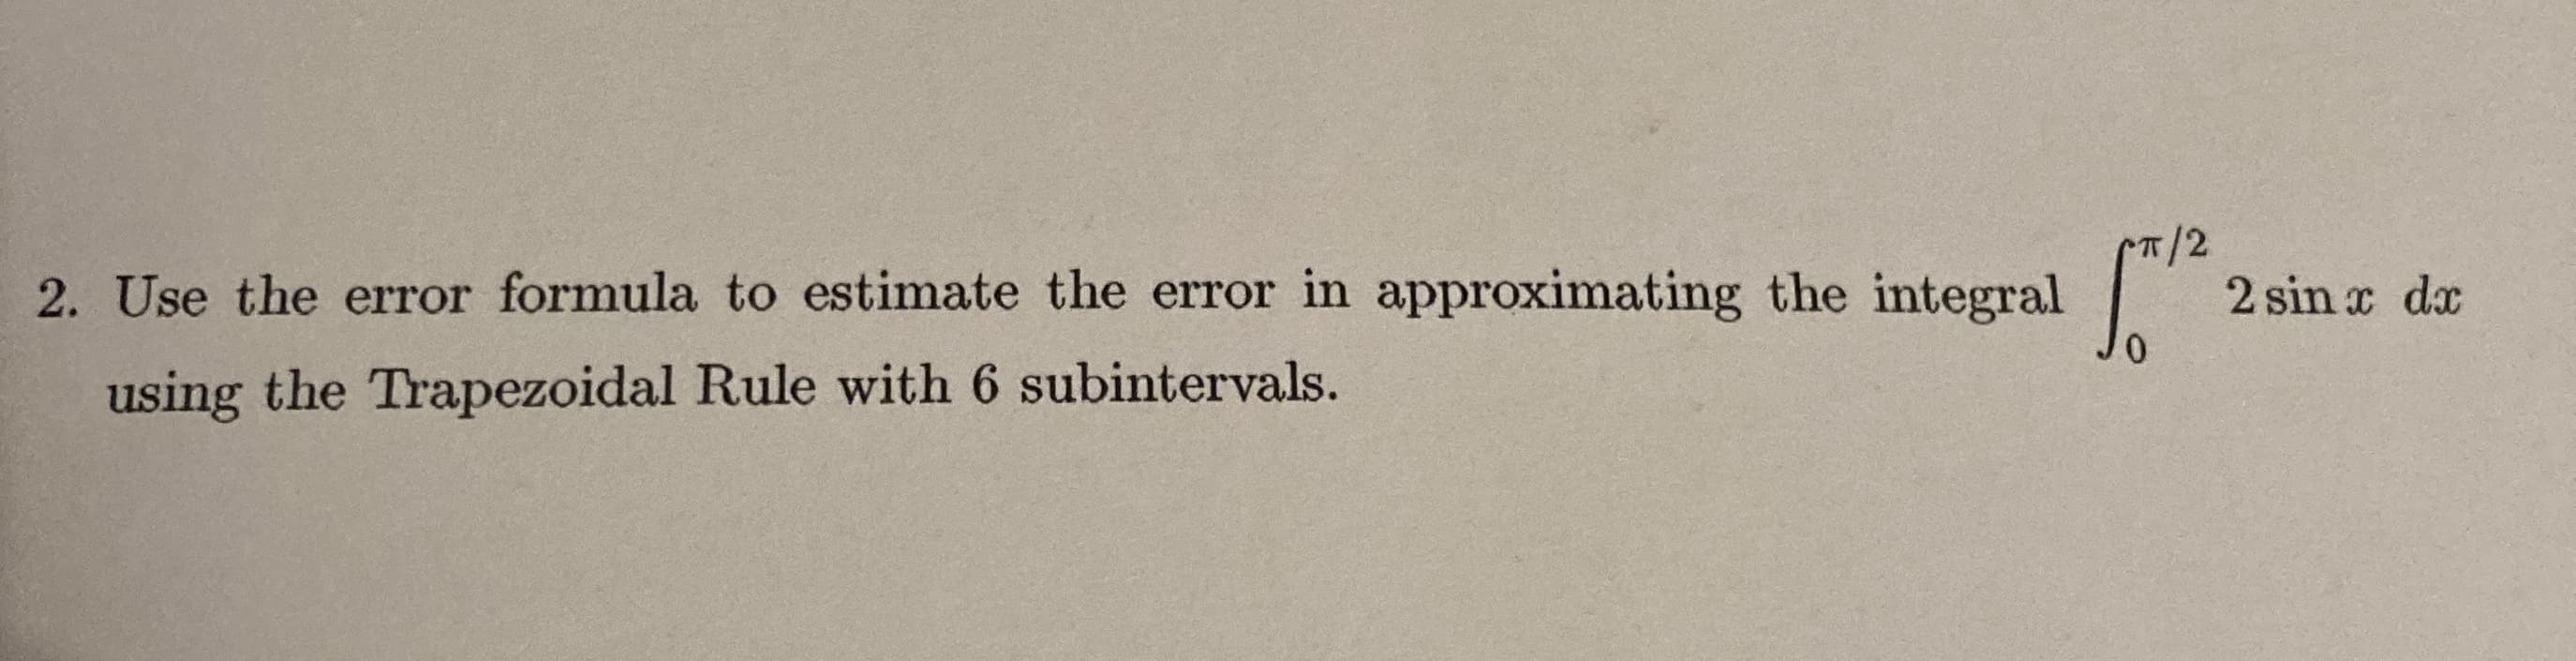 2. Use the error formula to estimate the error in approximating the integral
T/2
2 sin x dx
using the Trapezoidal Rule with 6 subintervals.
0.
